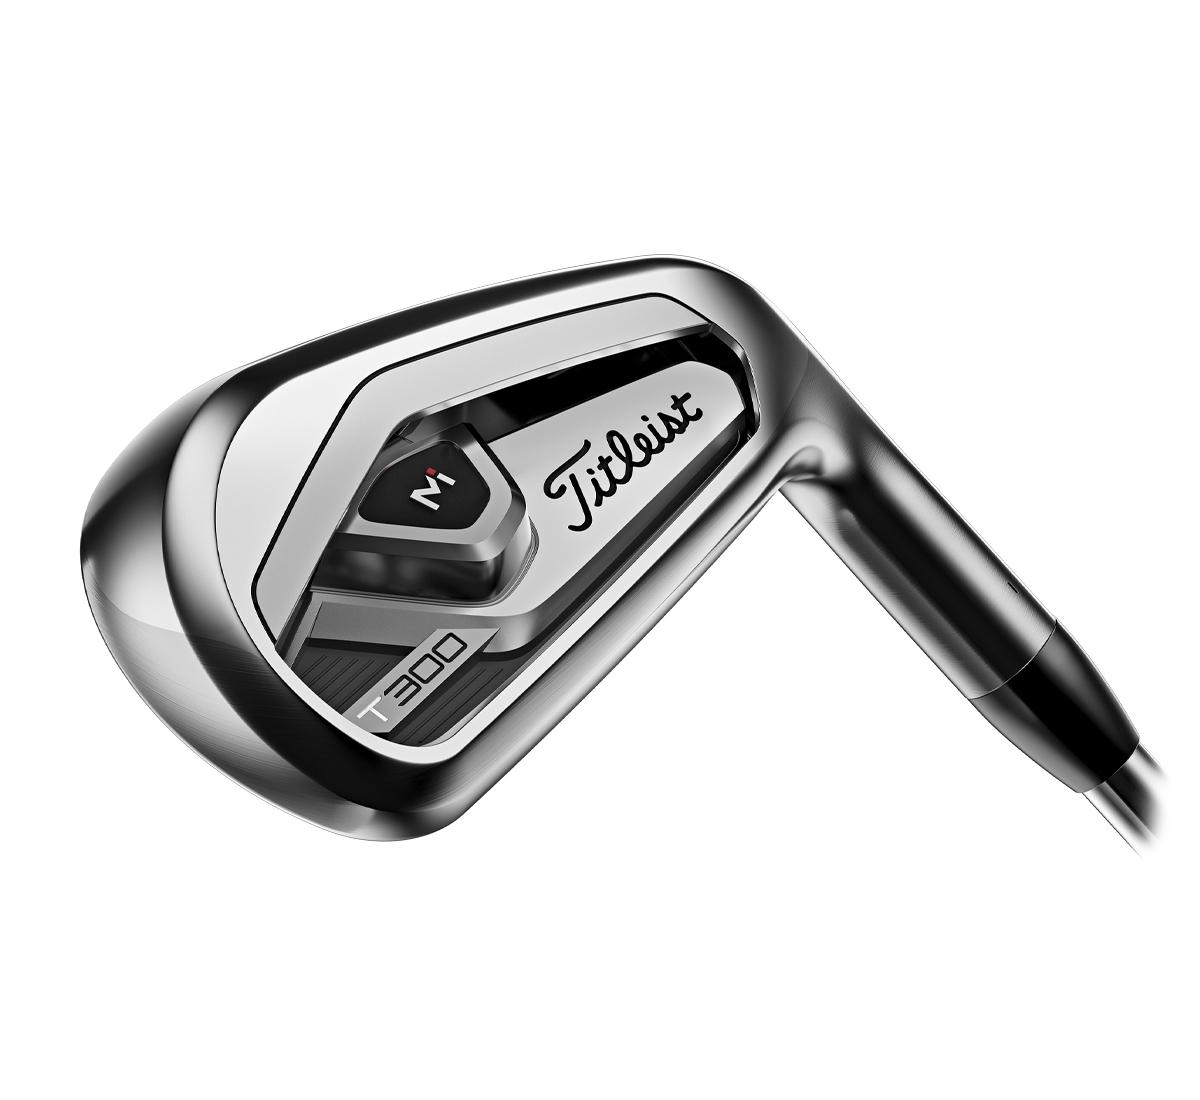 6〜PWのアイアン5本セットTitleist T300 2021 アイアンセット